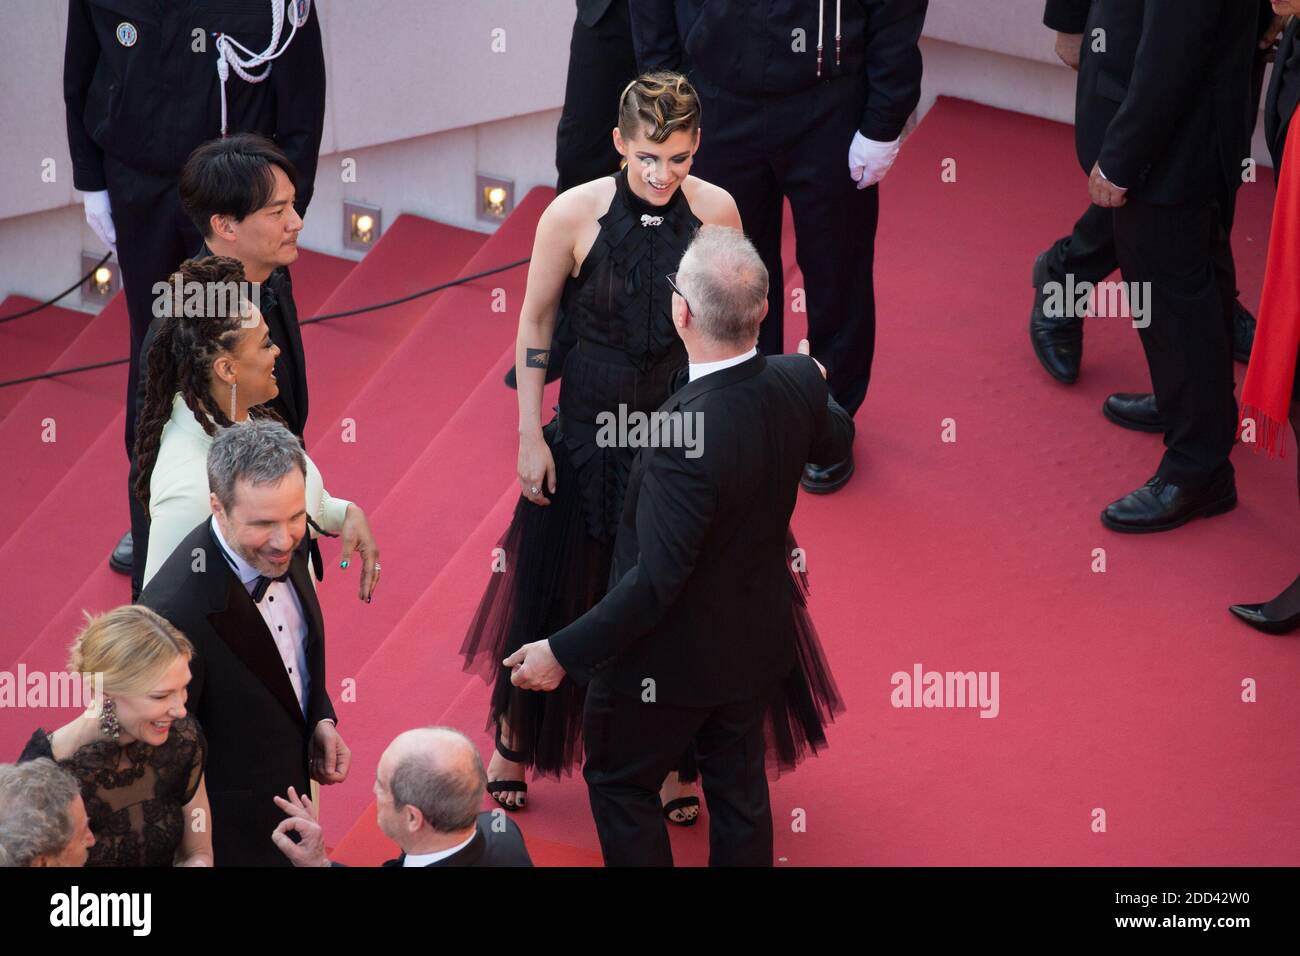 Kristen Stewart, Thierry Fremont on the red carpet at opening ceremony during 71st Cannes film festival on May 08, 2018 in Cannes, France. Photo by Nasser Berzane/ABACAPRESS.COM Stock Photo